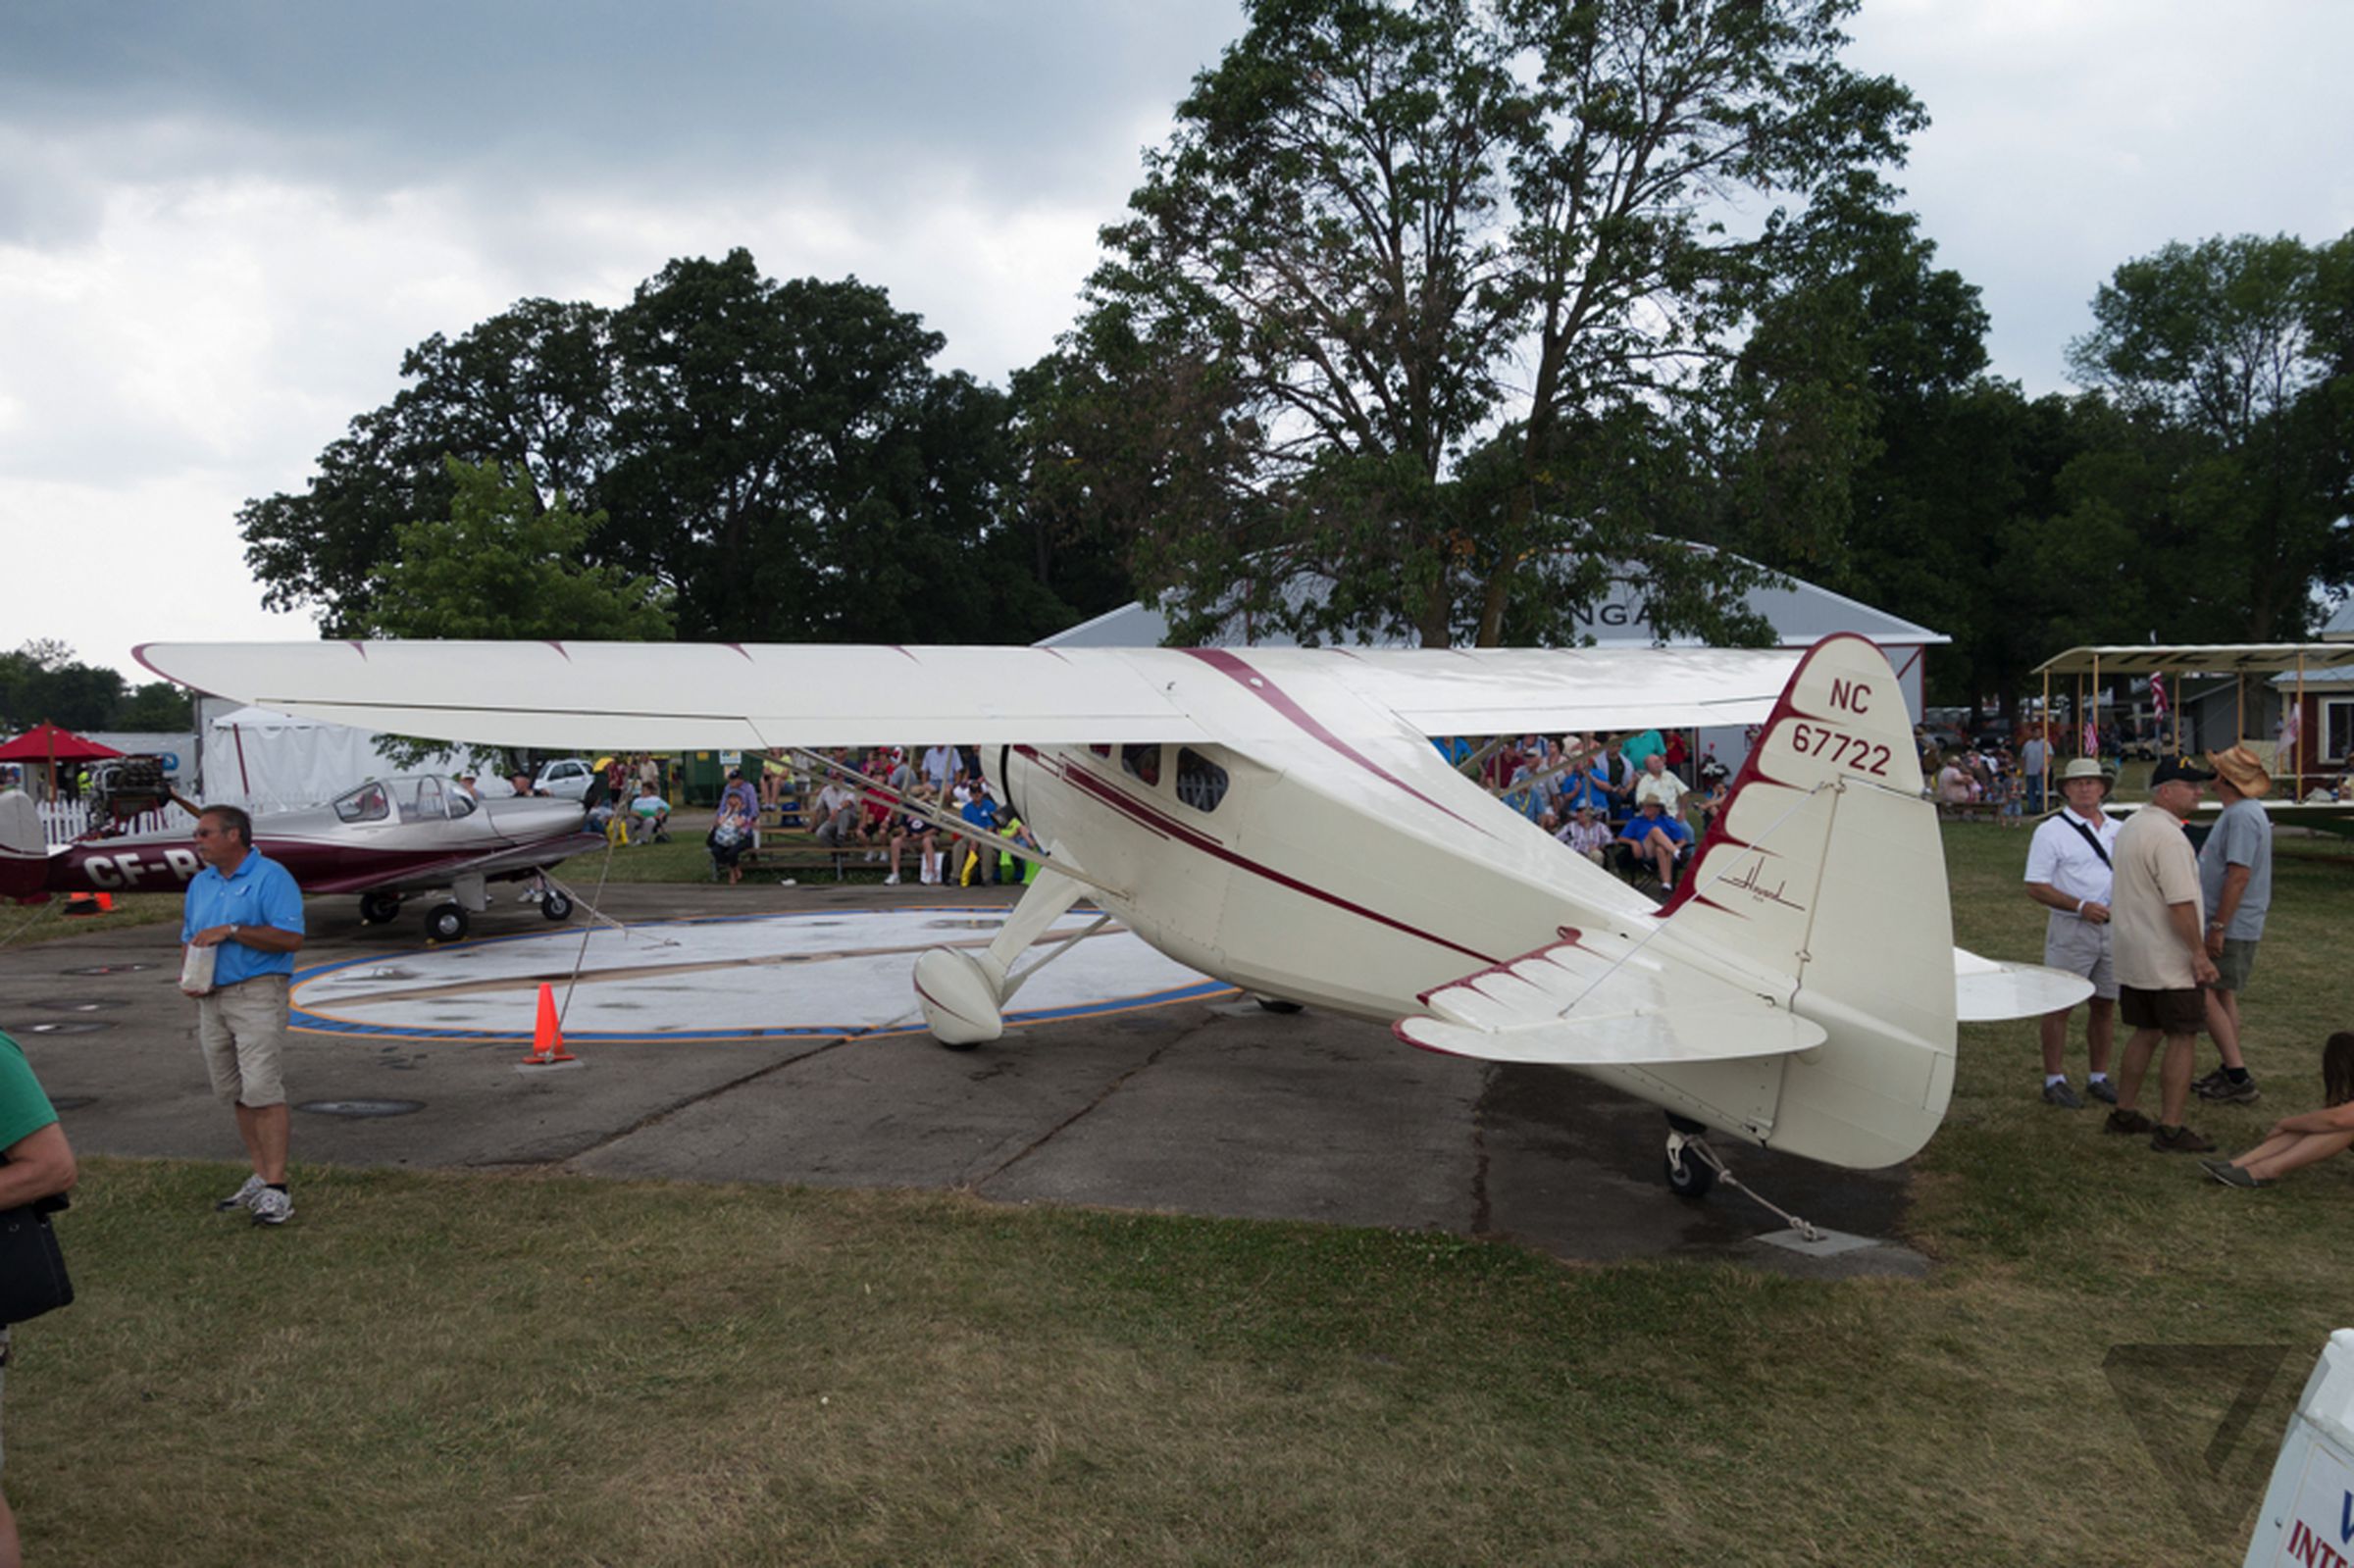 The incredible airplanes and helicopters of EAA AirVenture 2014